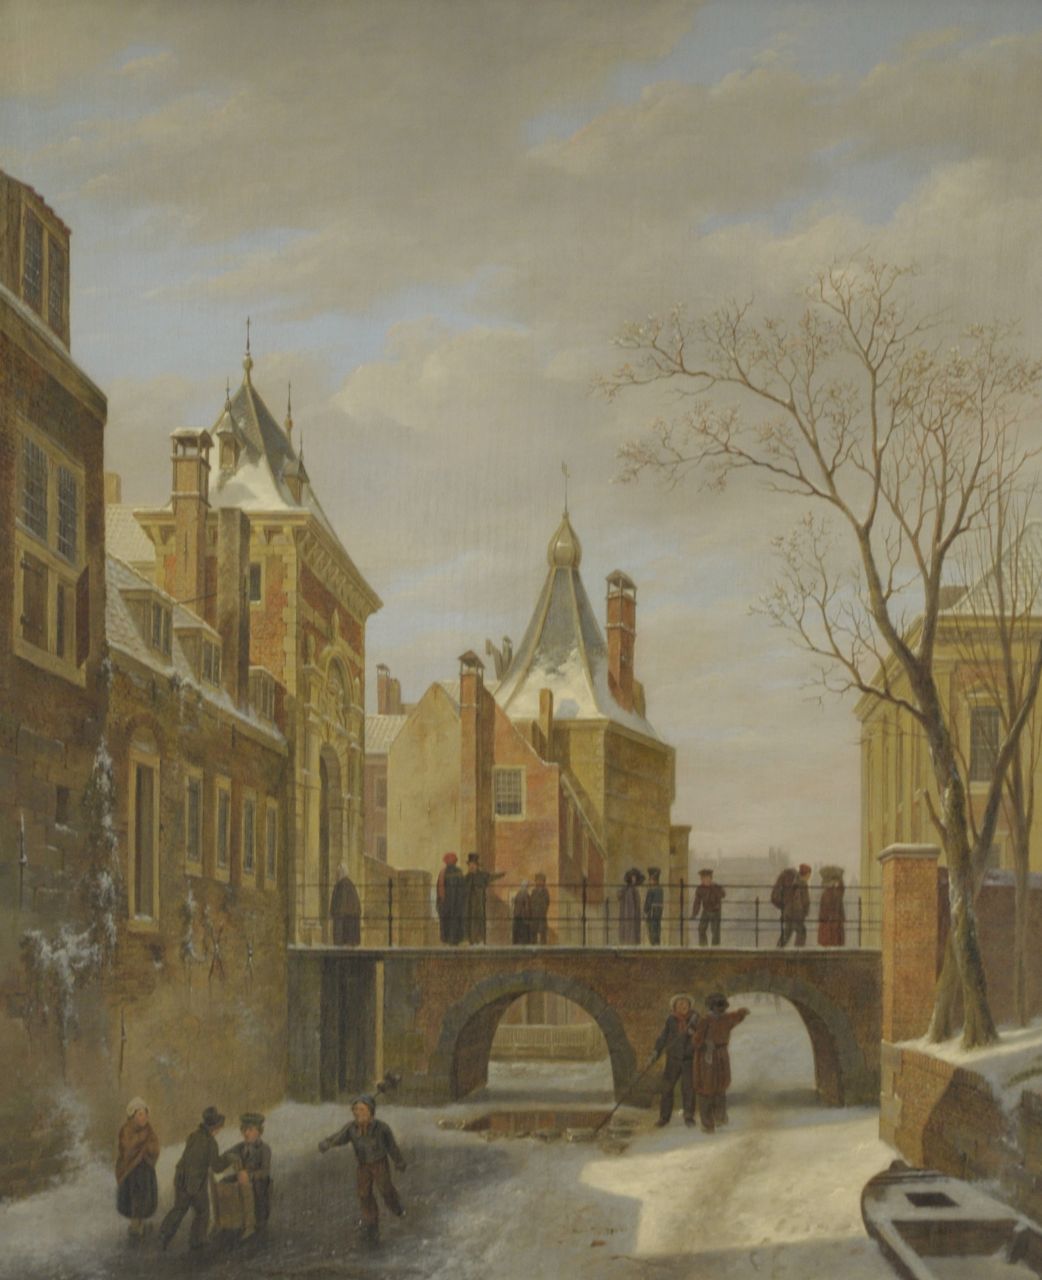 Hove B.J. van | Bartholomeus Johannes 'Bart' van Hove, Skaters by the 'Grenadierspoort', The Hague, oil on panel 47.4 x 38.1 cm, signed l.r. and dated 1823